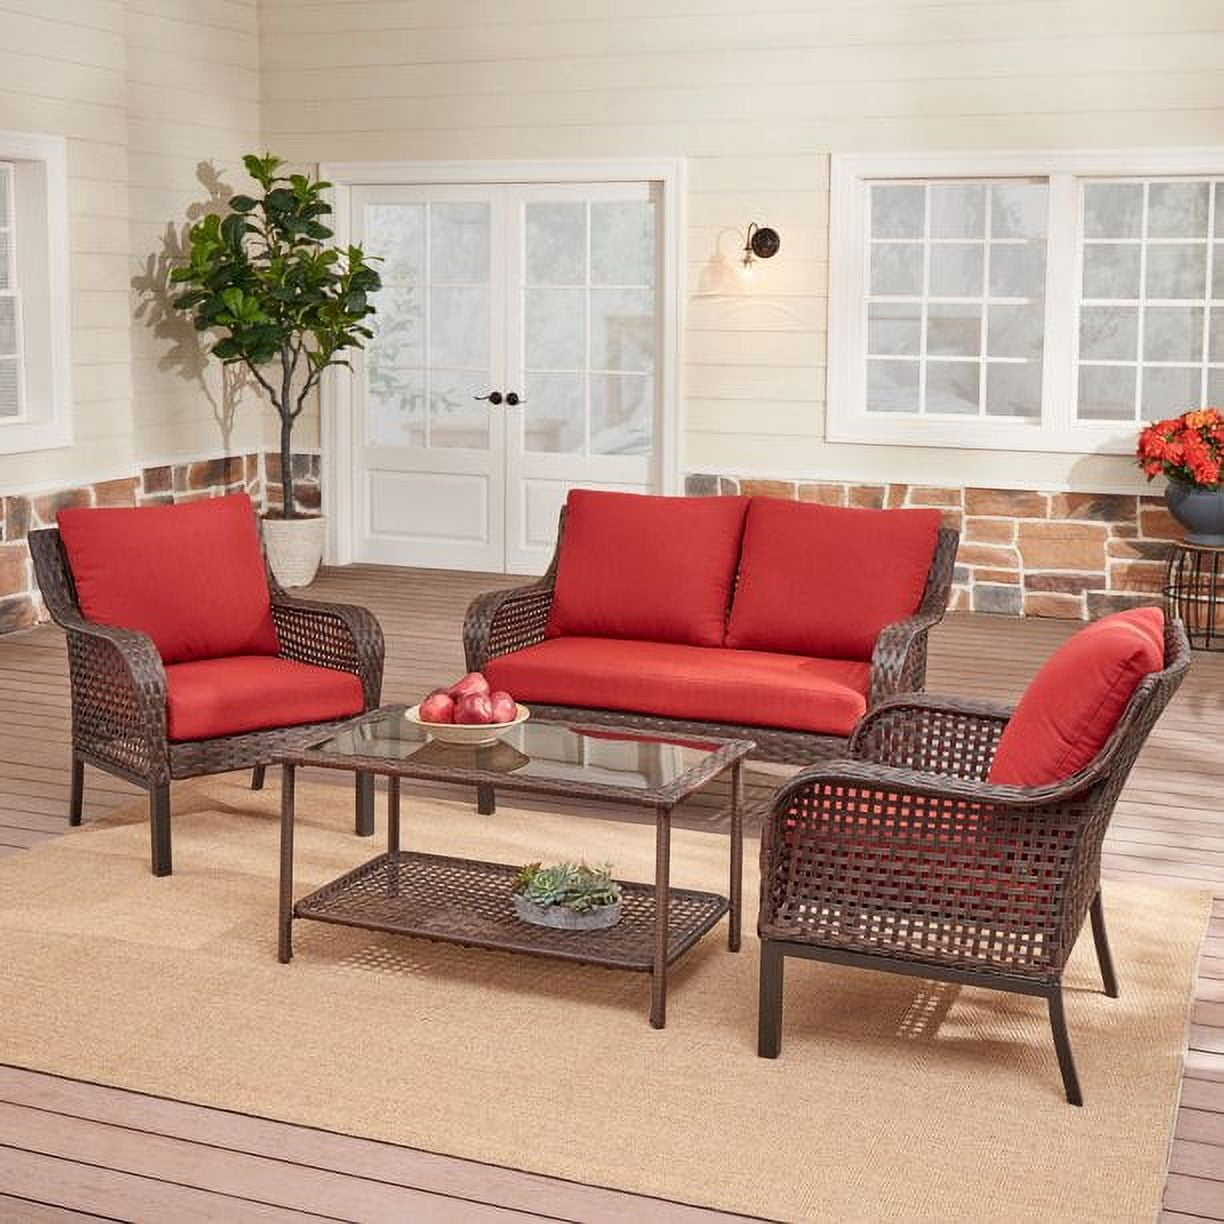 Outdoor patio furniture set with red cushions, including a sofa, two chairs, and a glass-top coffee table.